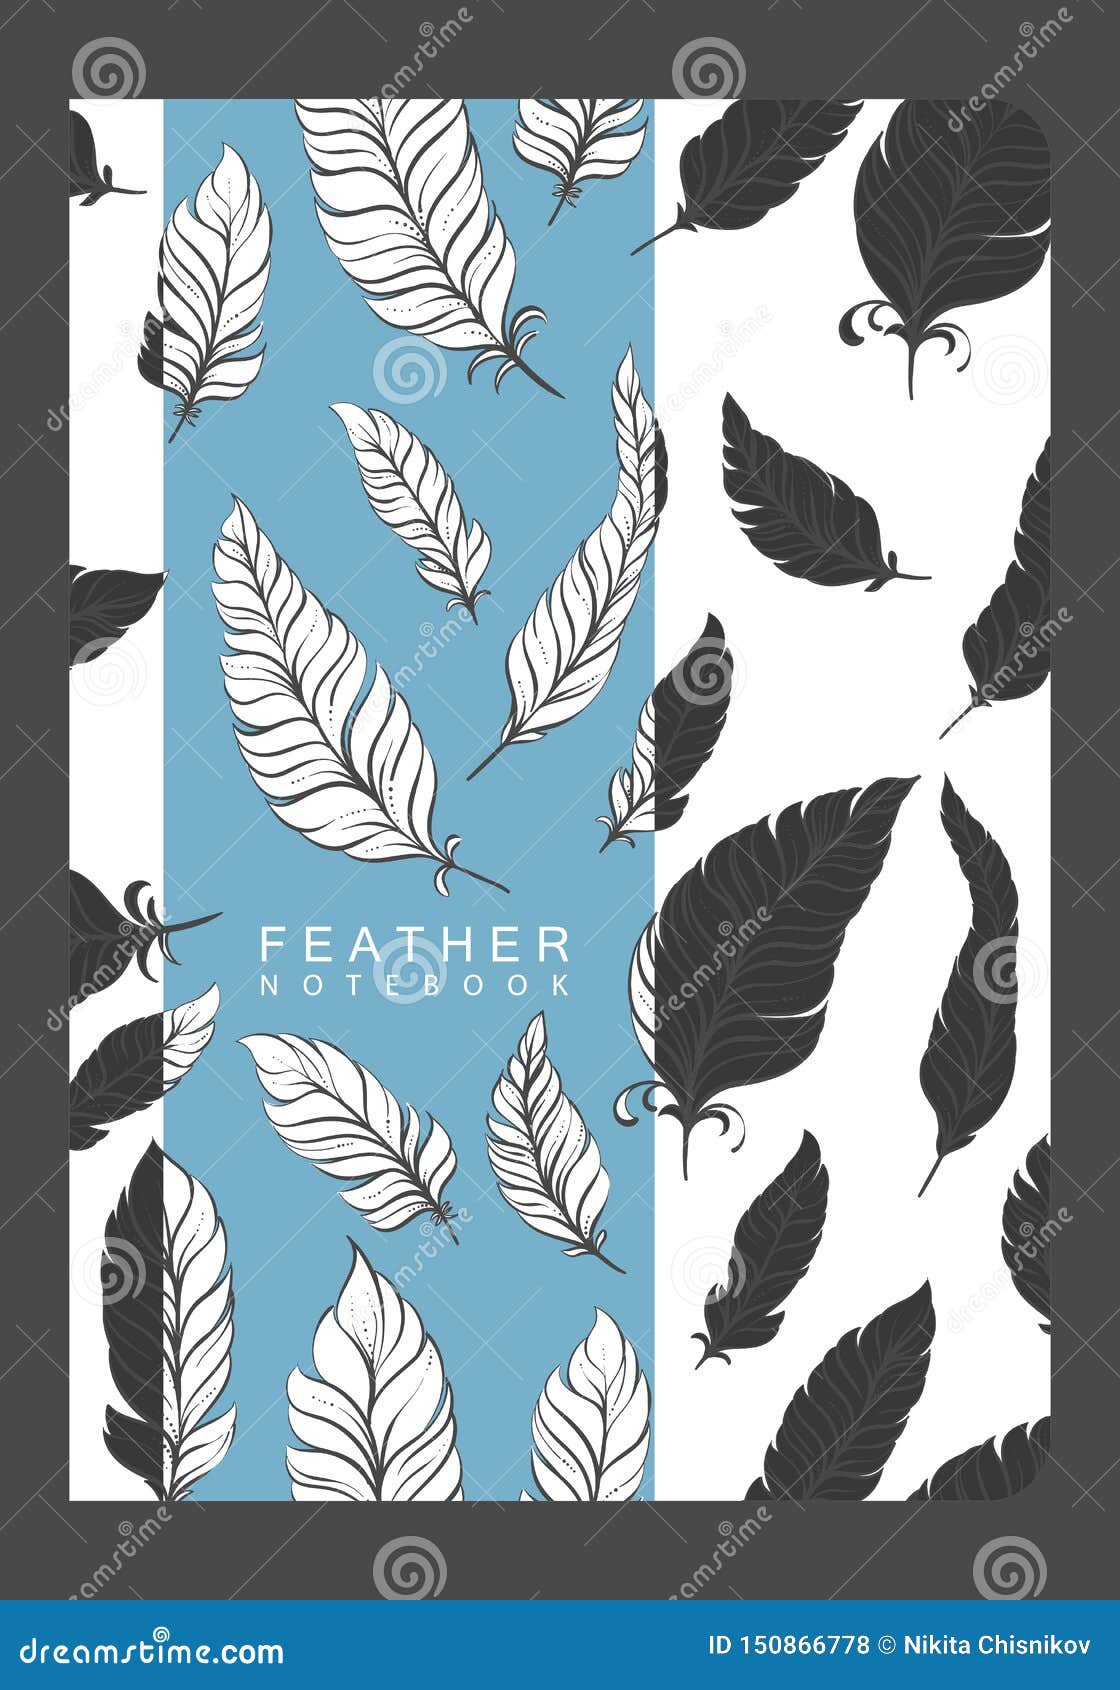 notebook-template-with-feathers-stock-vector-illustration-of-style